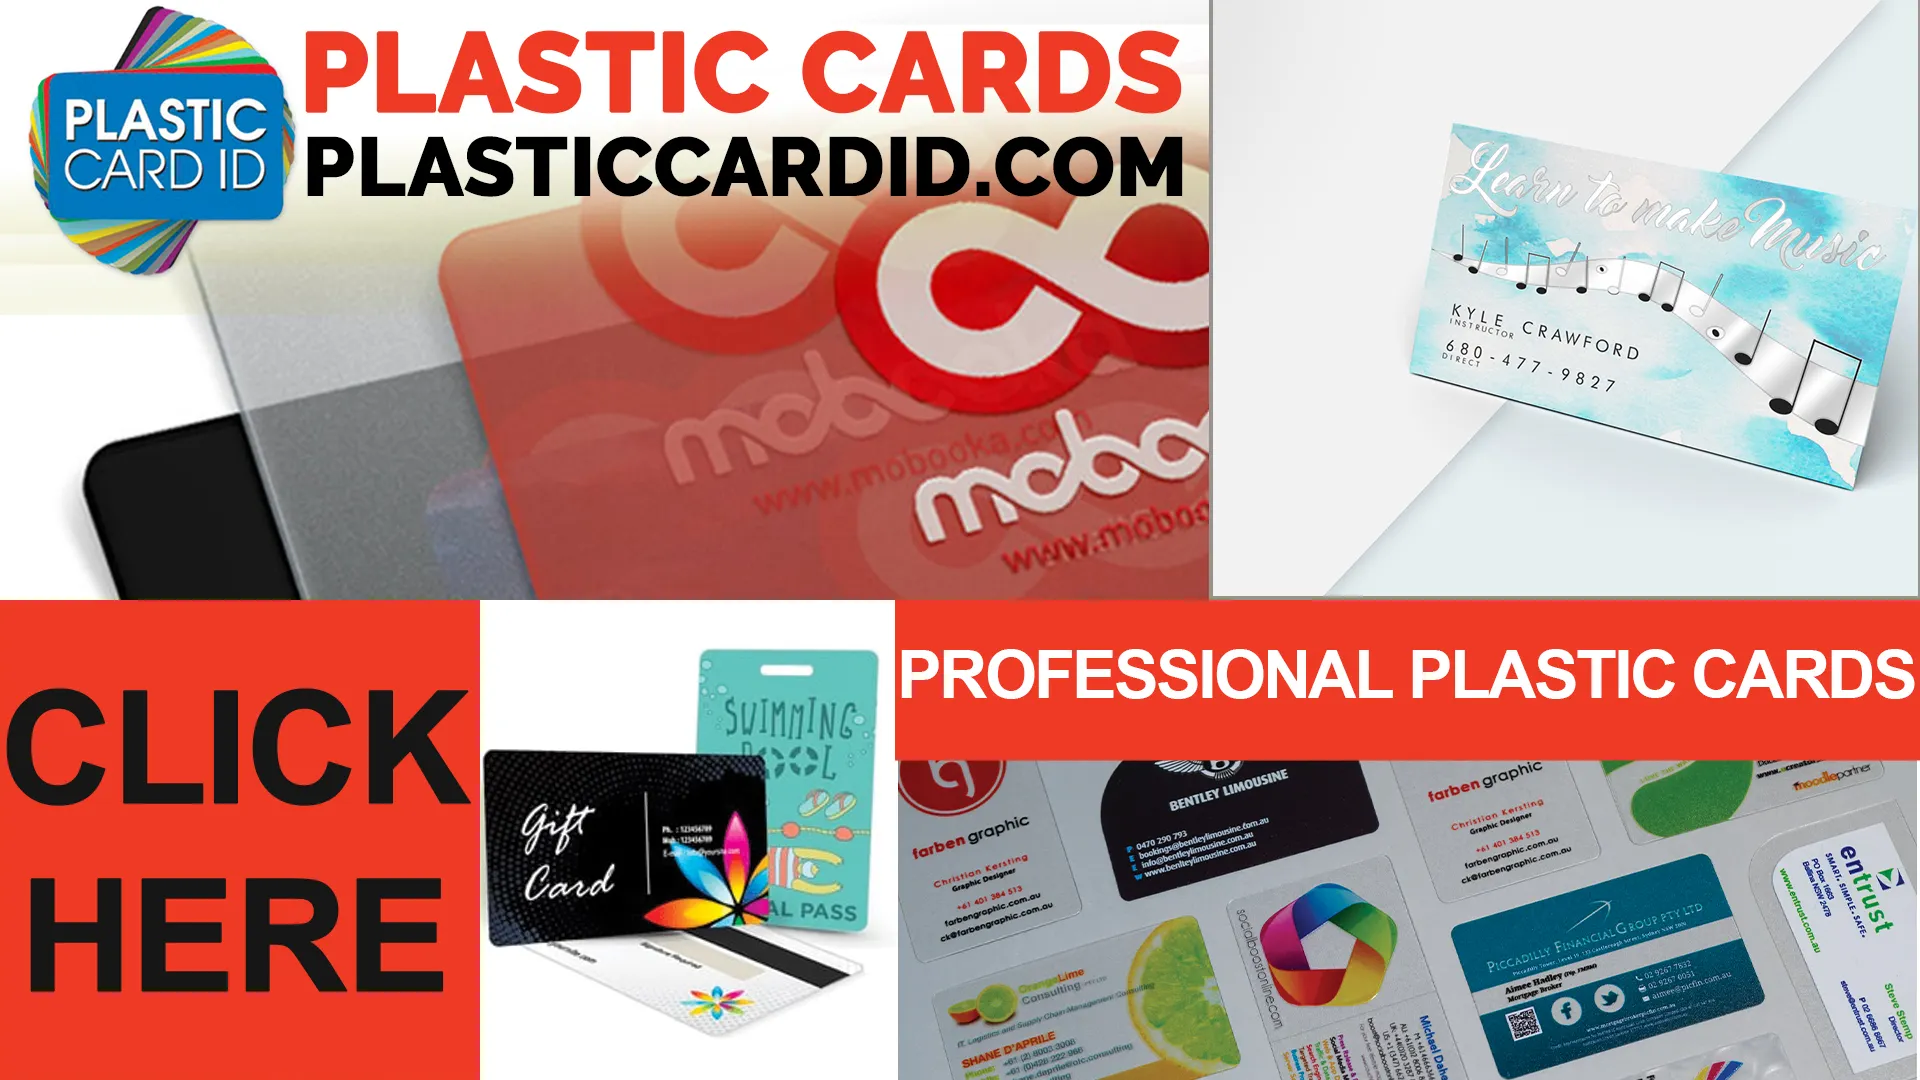 Welcome to Plastic Card ID




: Your Ultimate Guide to Plastic Cards and Printers